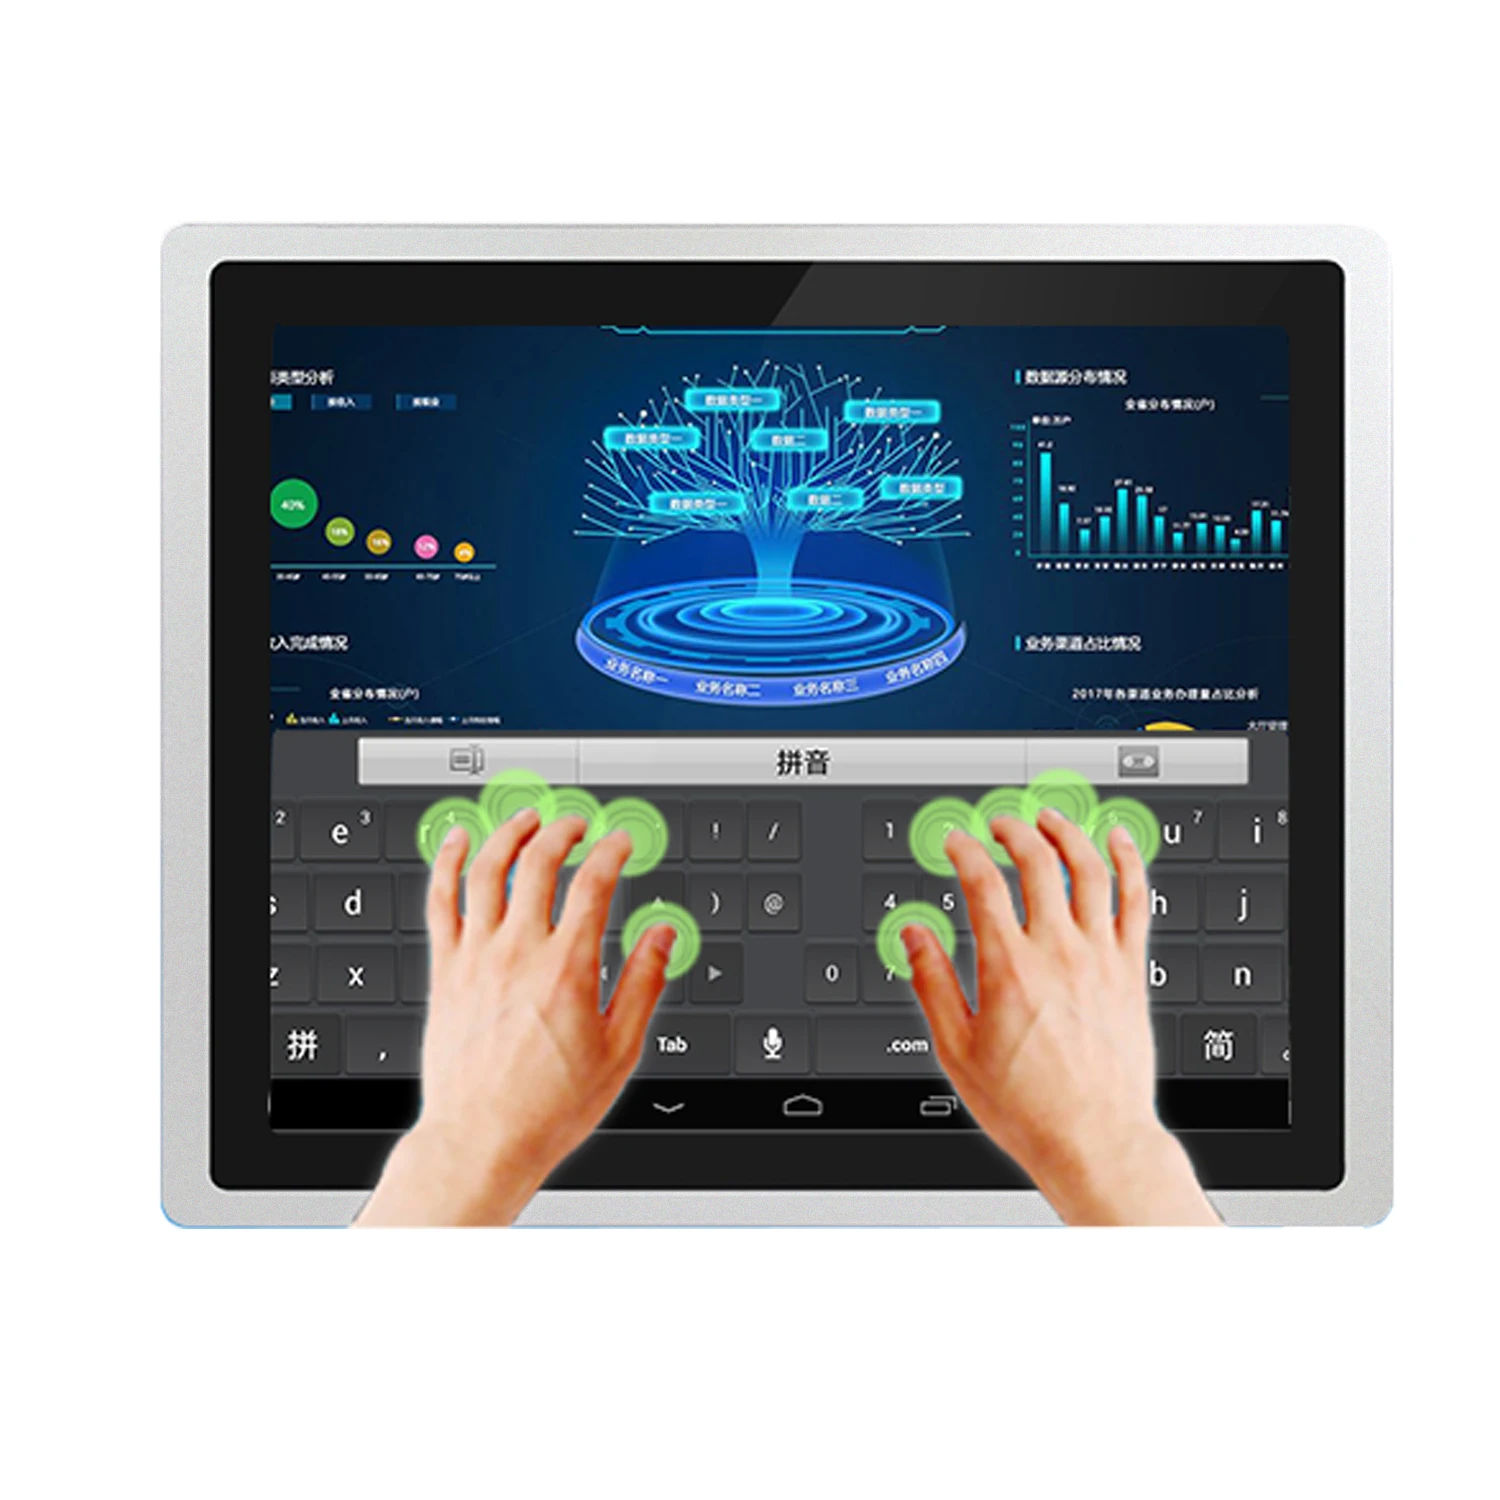 17 Inch Embedded Industrial Computer Mini Tablet All-in-one PC with Capacitive Touch Screen Core i3-3217U Built-in WiFi RS232 enlarge